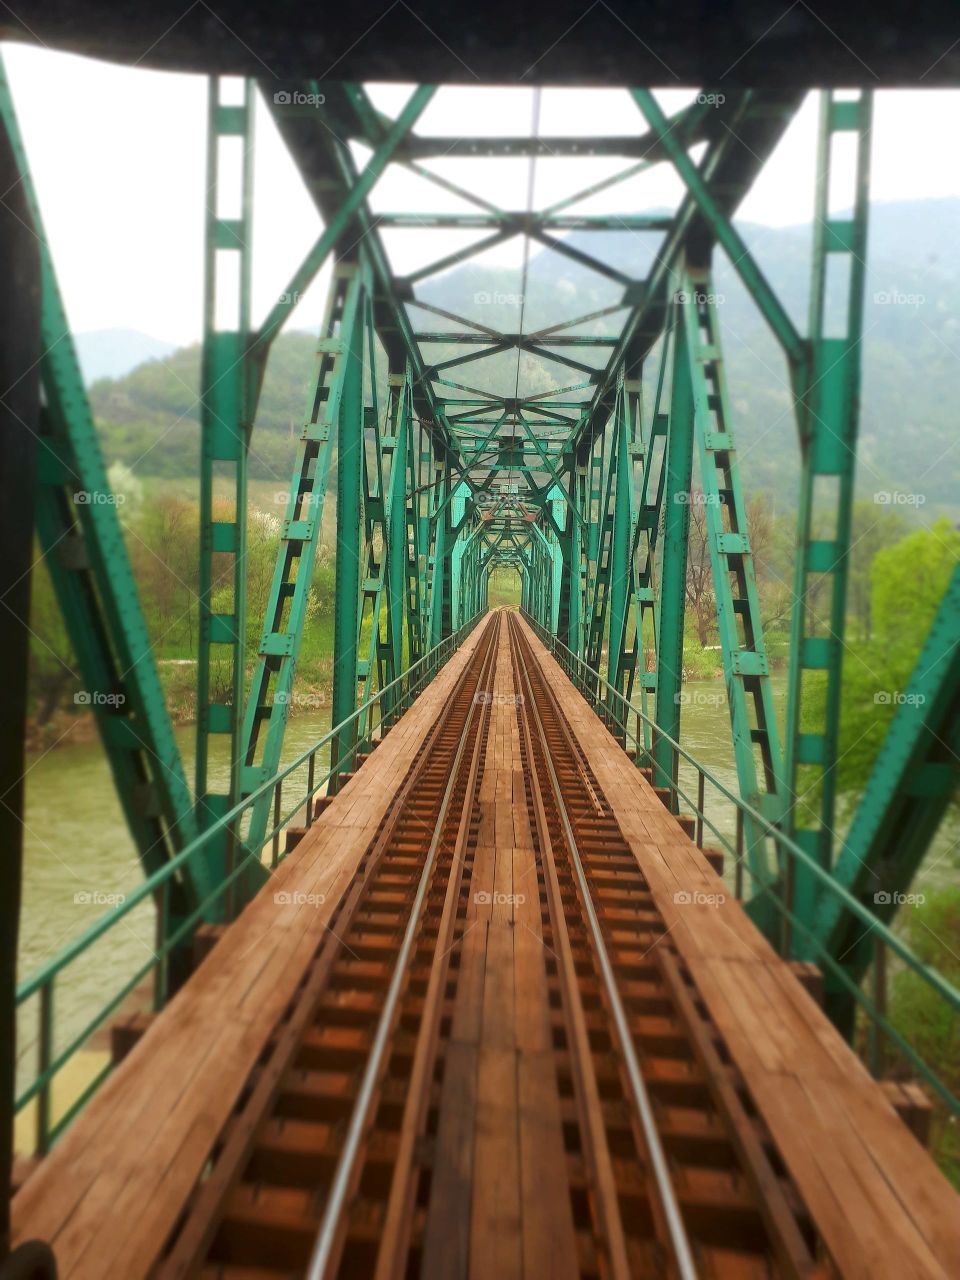 A view from the window of the last passenger wagon to the railway green bridge on the river of Bosna.